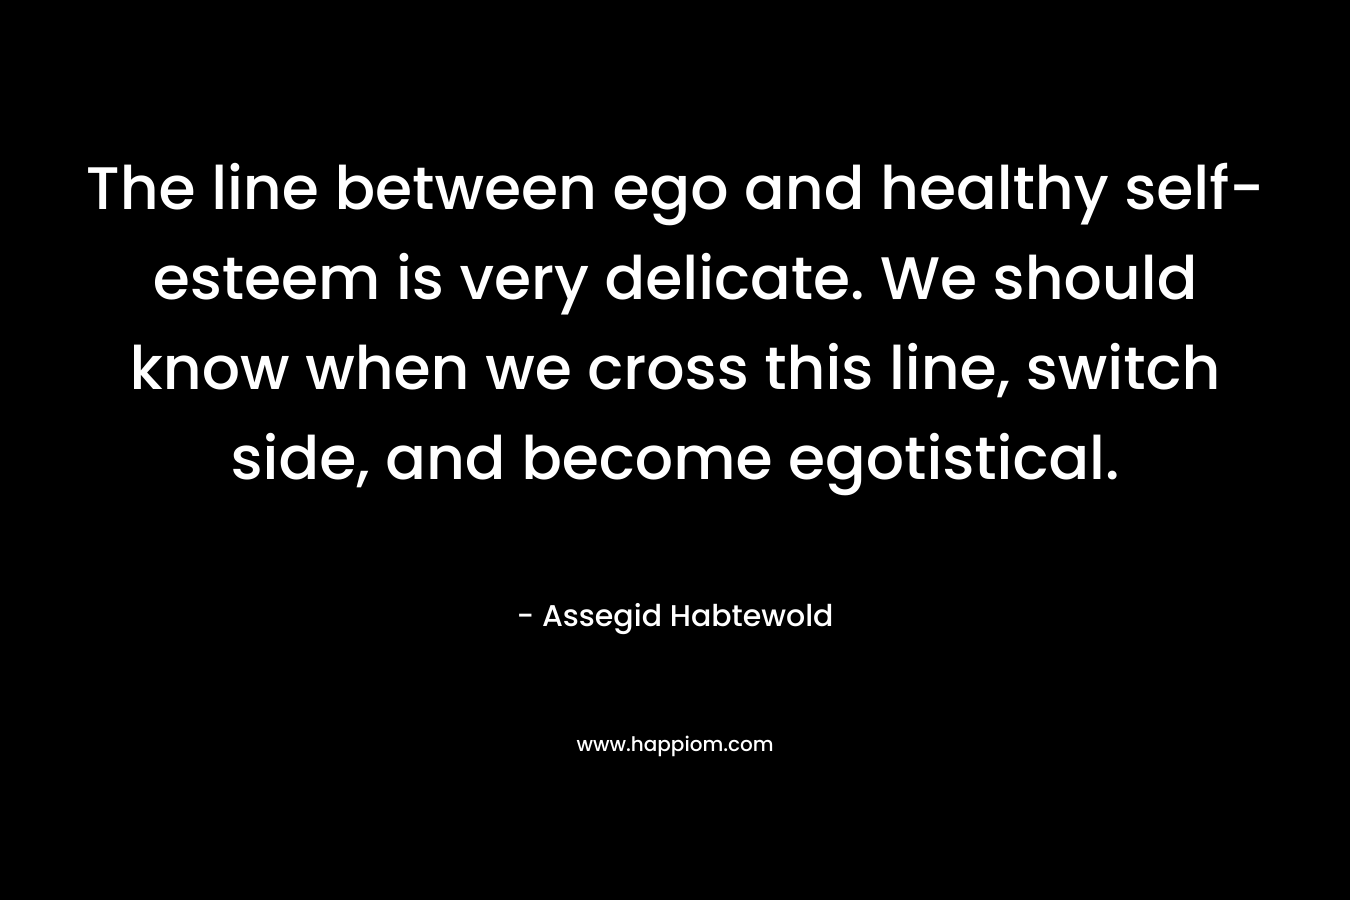 The line between ego and healthy self-esteem is very delicate. We should know when we cross this line, switch side, and become egotistical.